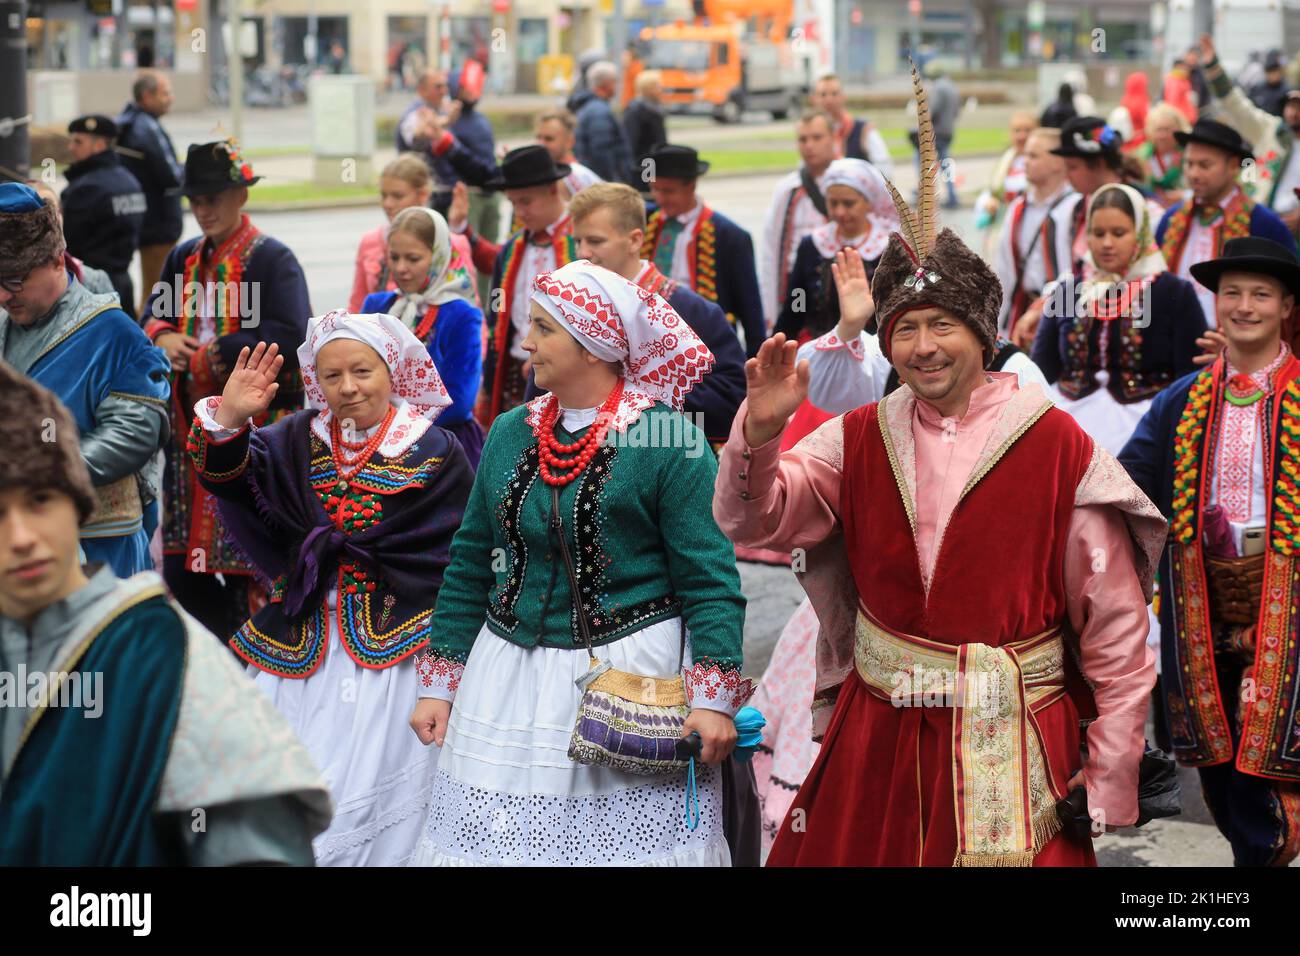 Munich, Germany.  18 Sep, 2022. The Oktoberfest Costume and Riflemen's Parade took place today with early showers failing to dampen the spirits of all involved. Saturday's official opening saw crowds down on the last time the Oktoberfest was held but there were considerably more people out and about today despite the rain. Credit: Clearpiximages/Alamy Live News Stock Photo